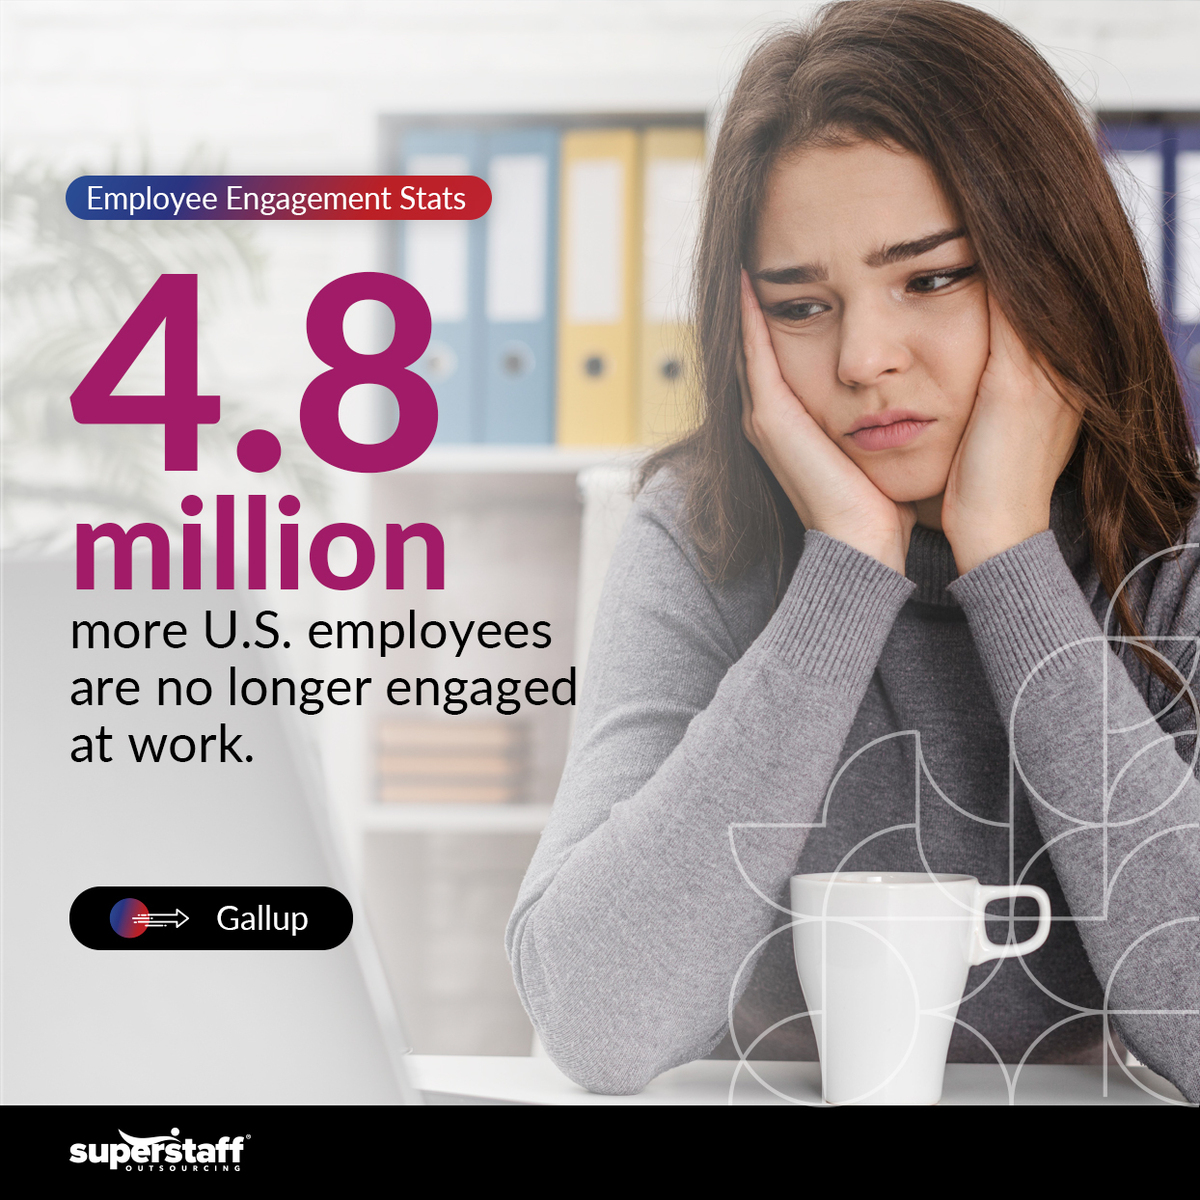 A frustrated employee looks on. Image caption reads, 4.8 million are now not engaged at work.